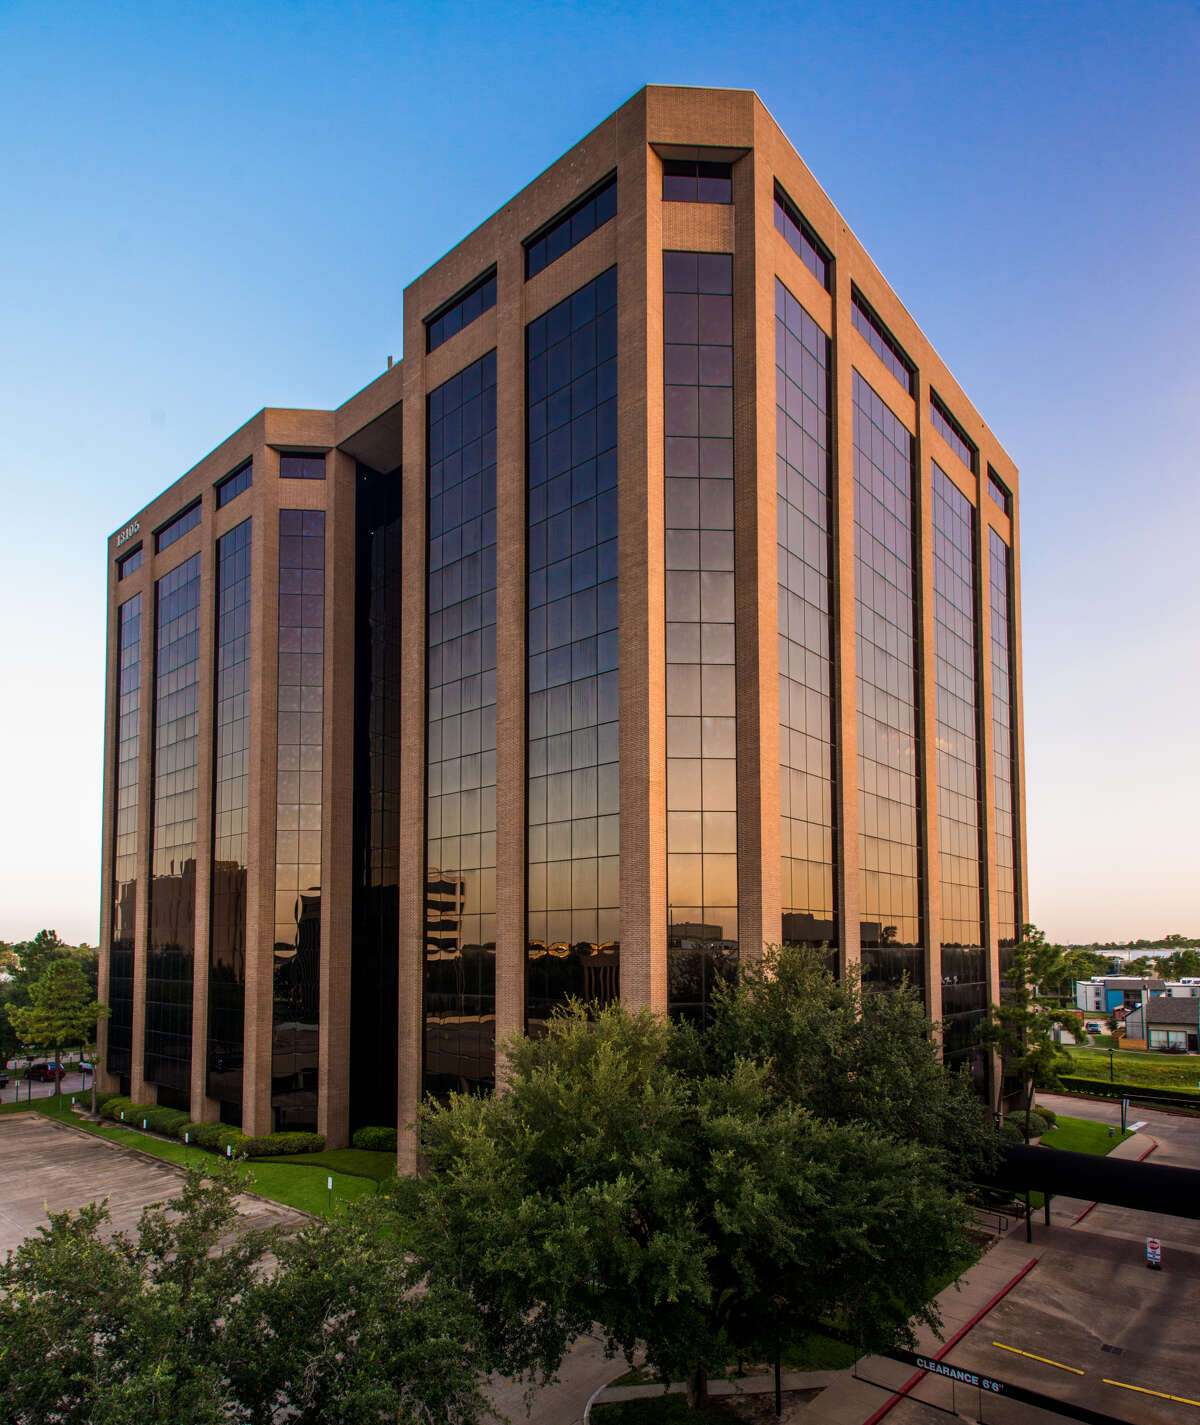 Avison Young has negotiated two office leases, one for 21,943 square feet, and the second for 26,810 square feet, at 13105 Northwest Freeway in Houston. Harris County Engineering Department-Recovery and Resiliency Division, Flood Control District and Community Services Department are set to occupy the spaces in July.